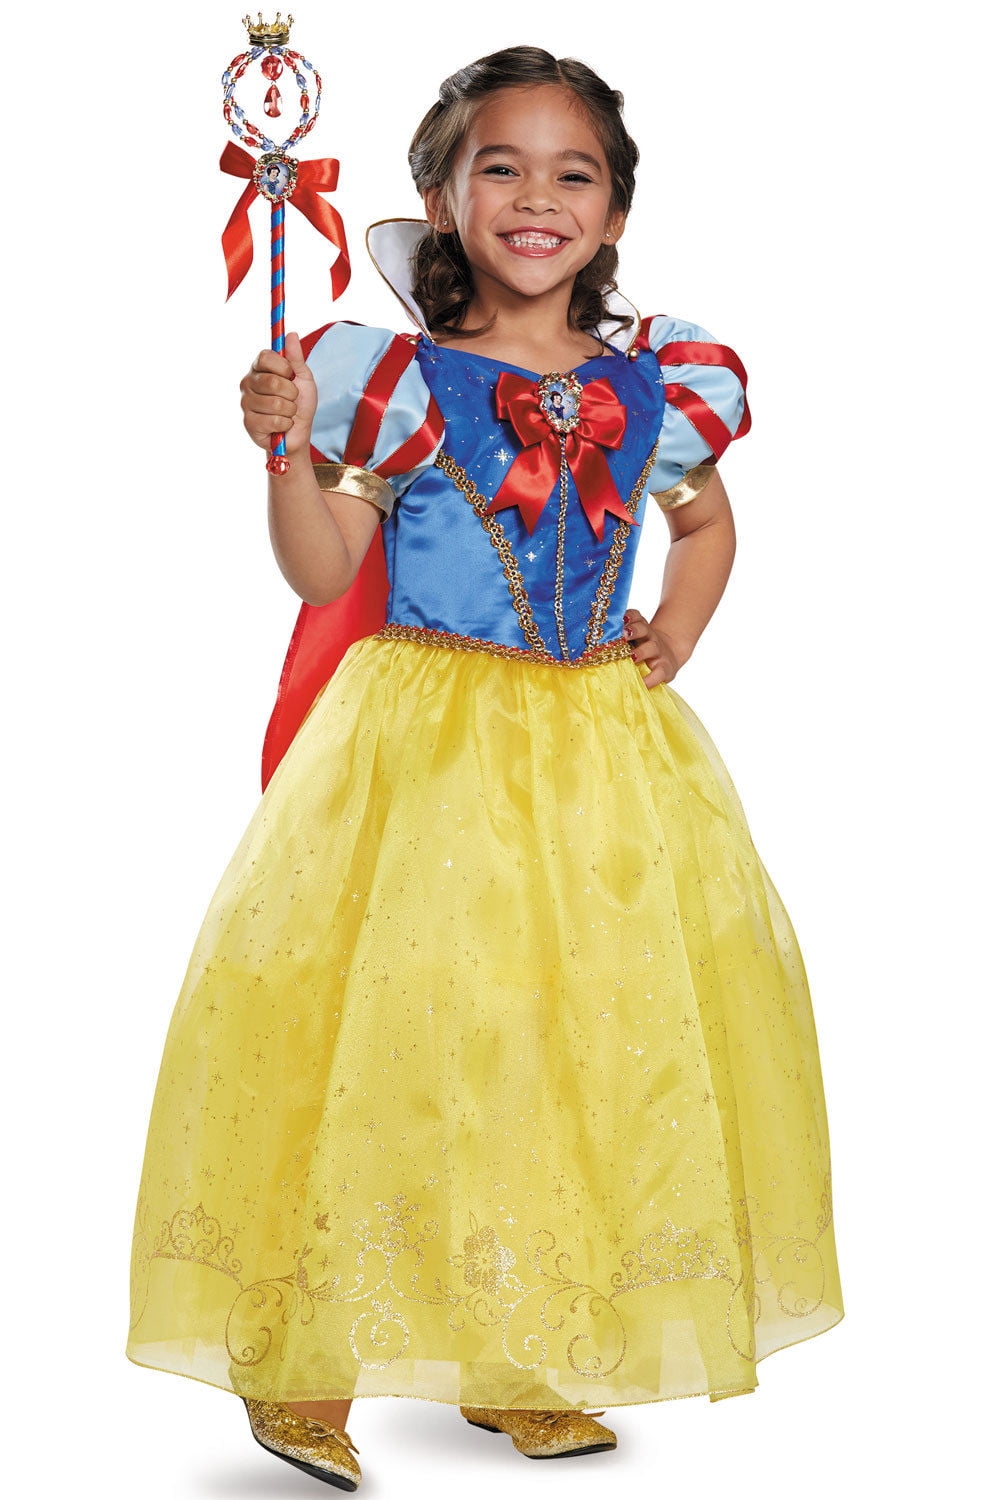 Details about   Deluxe Disney Dream Big Snow White Princess Costume Girls Fancy Dress  XS-MD